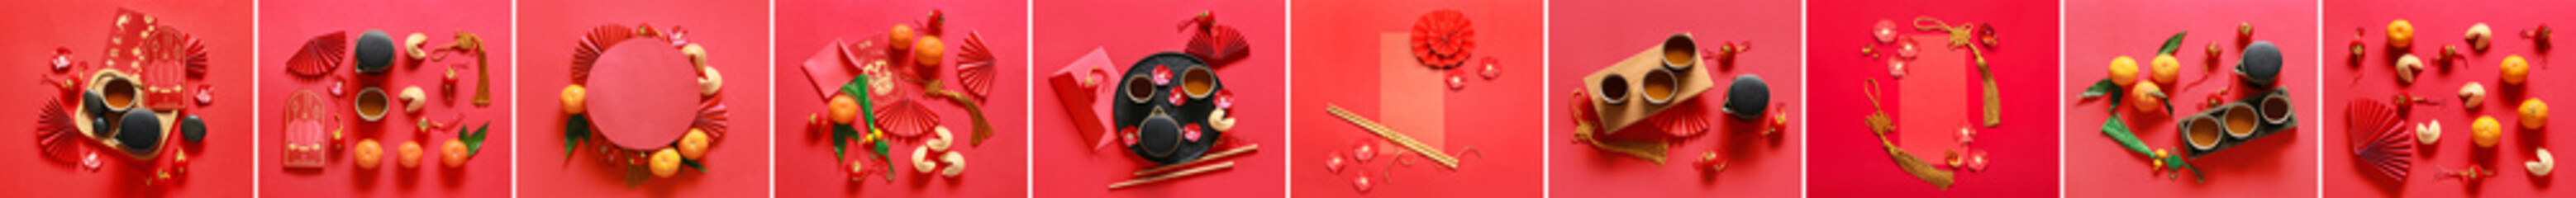 Collage of traditional Chinese symbols on red background. New Year celebration